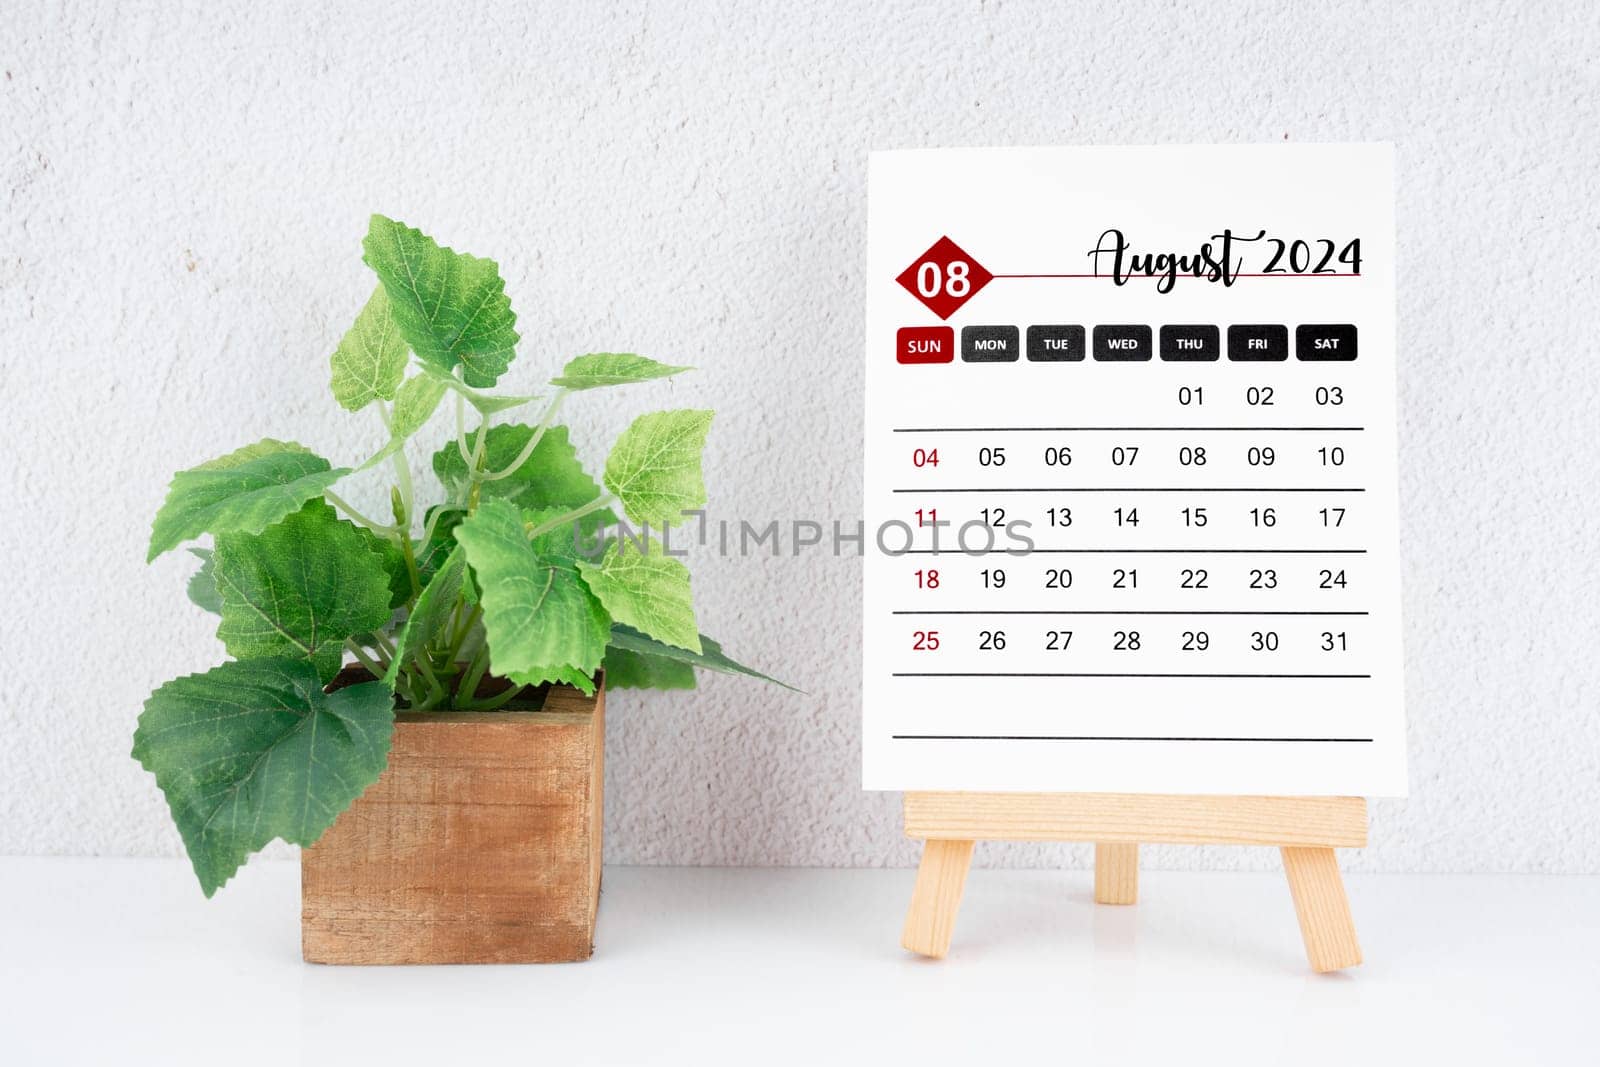 August 2024 calendar page and wooden plant pot on the table. by Gamjai